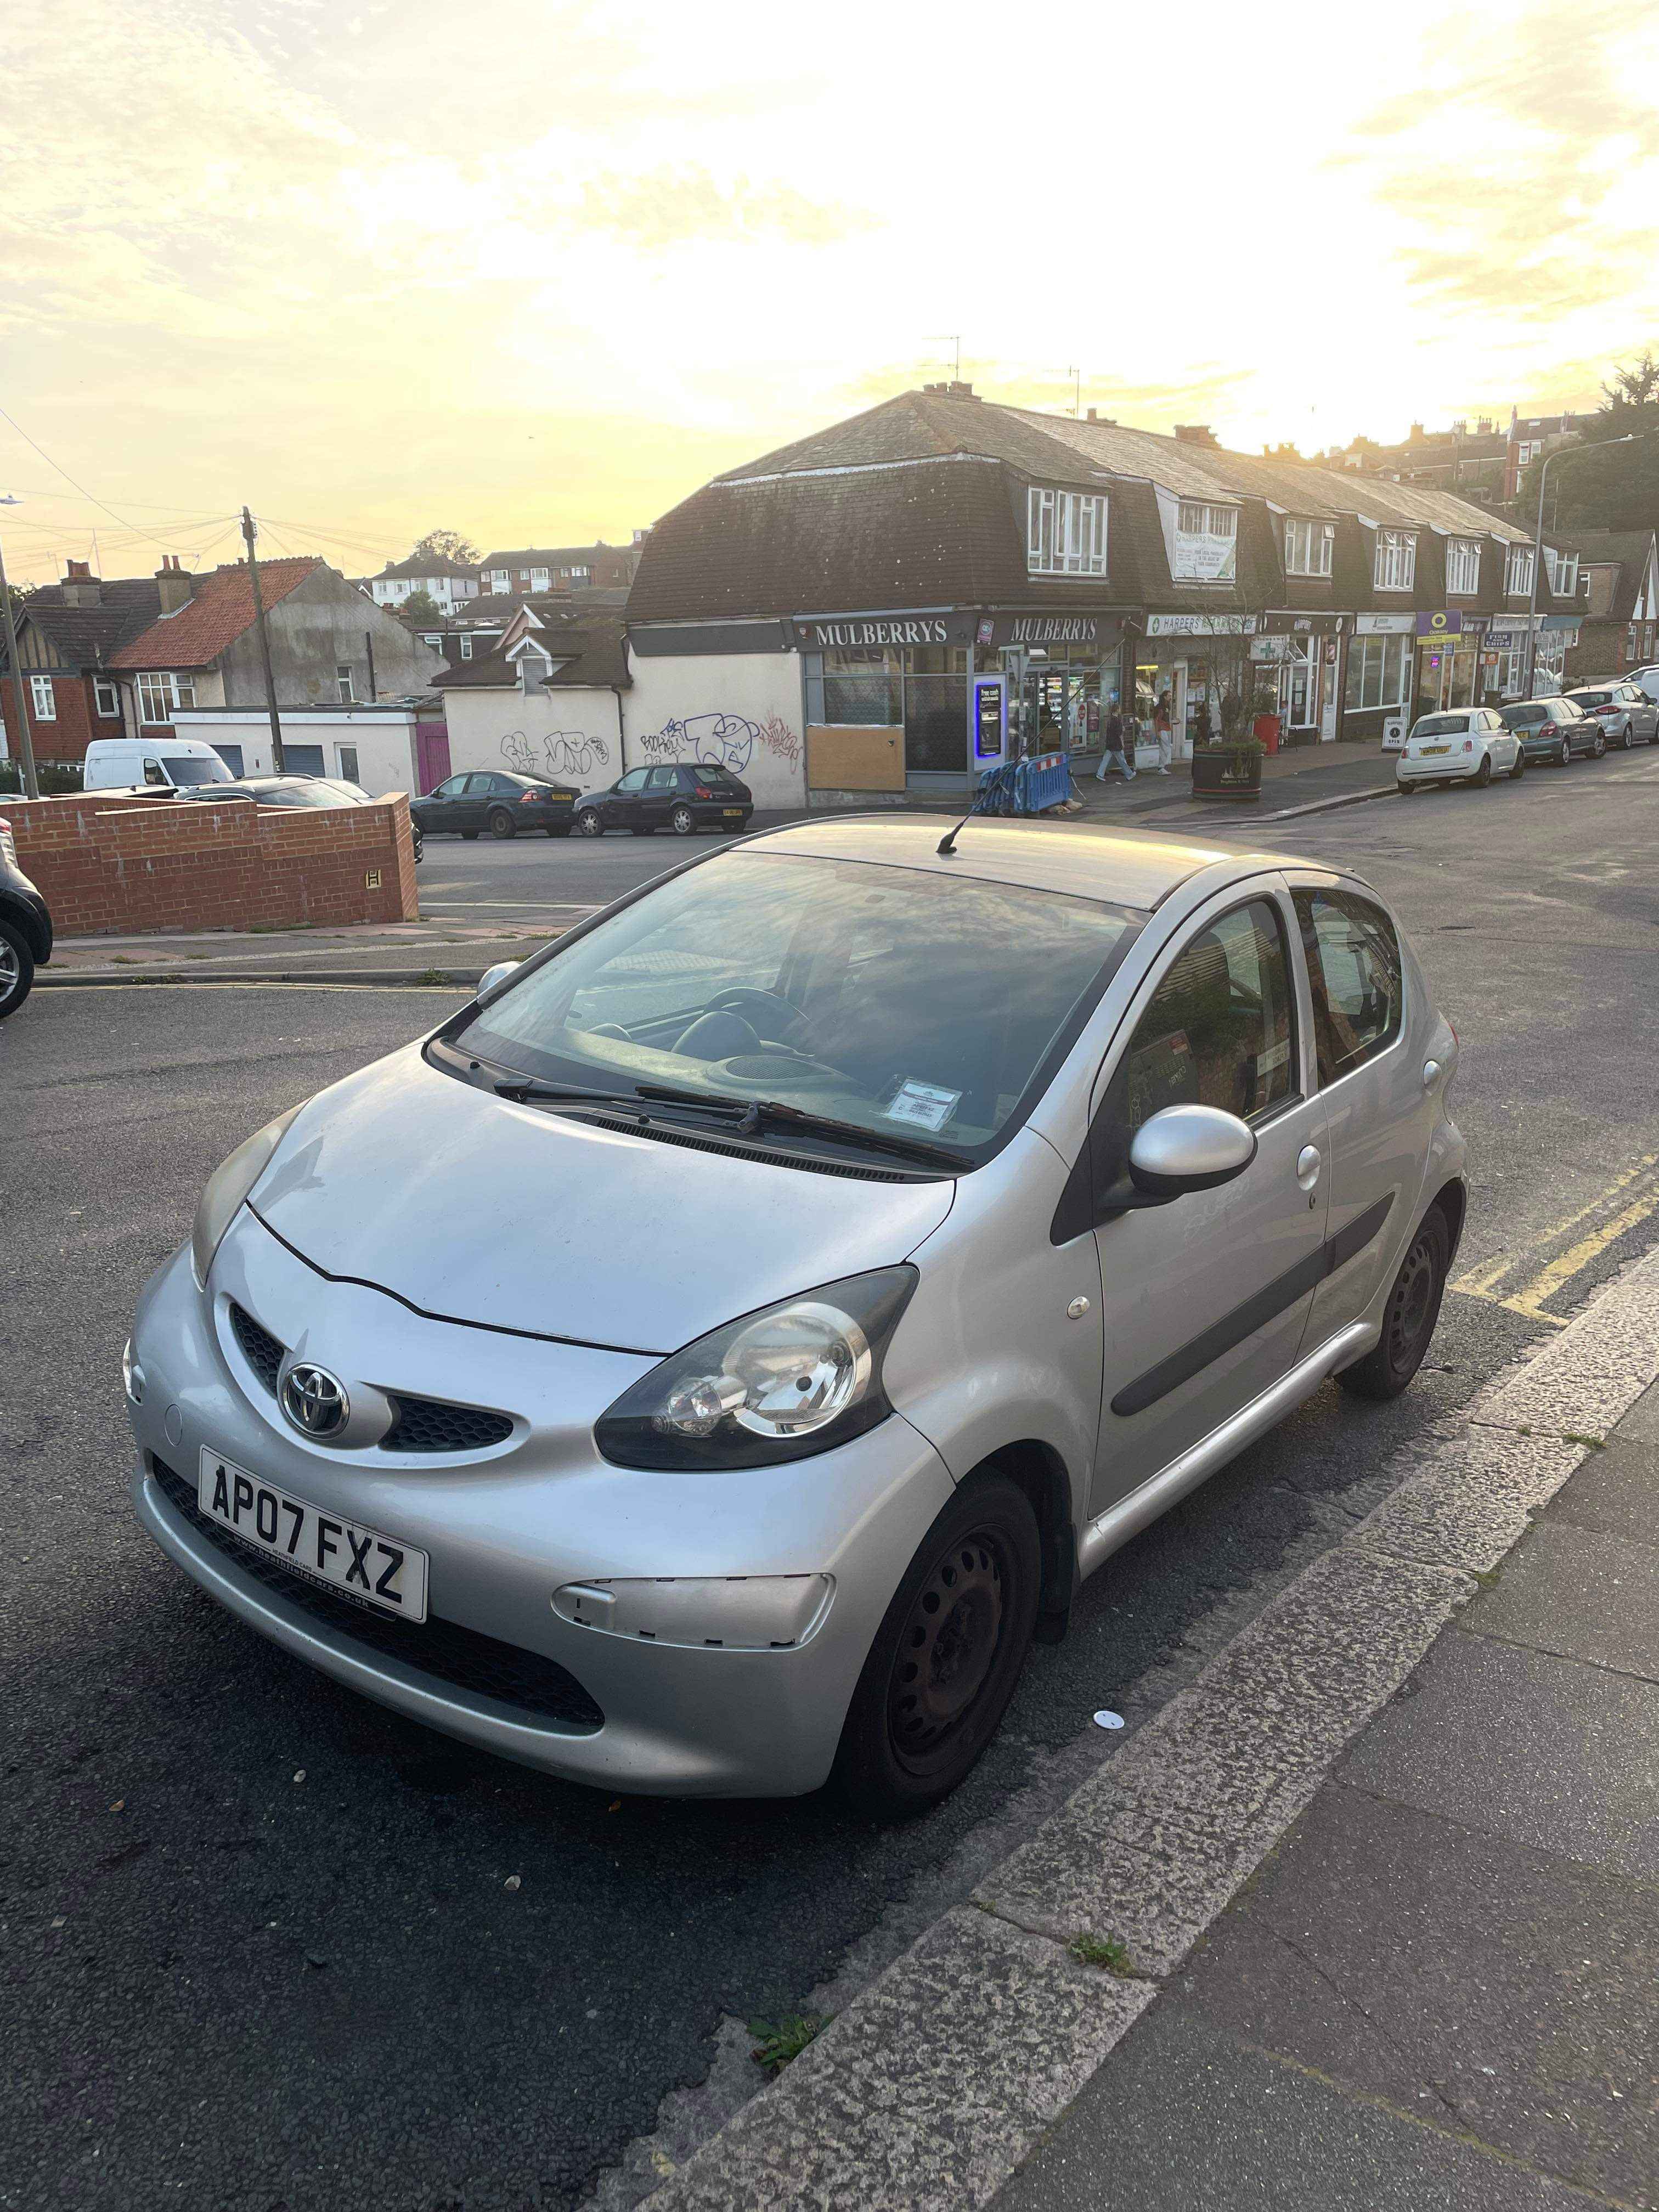 Photograph of AP07 FXZ - a Silver Toyota Aygo parked in Hollingdean by a non-resident, and potentially abandoned. The second of three photographs supplied by the residents of Hollingdean.